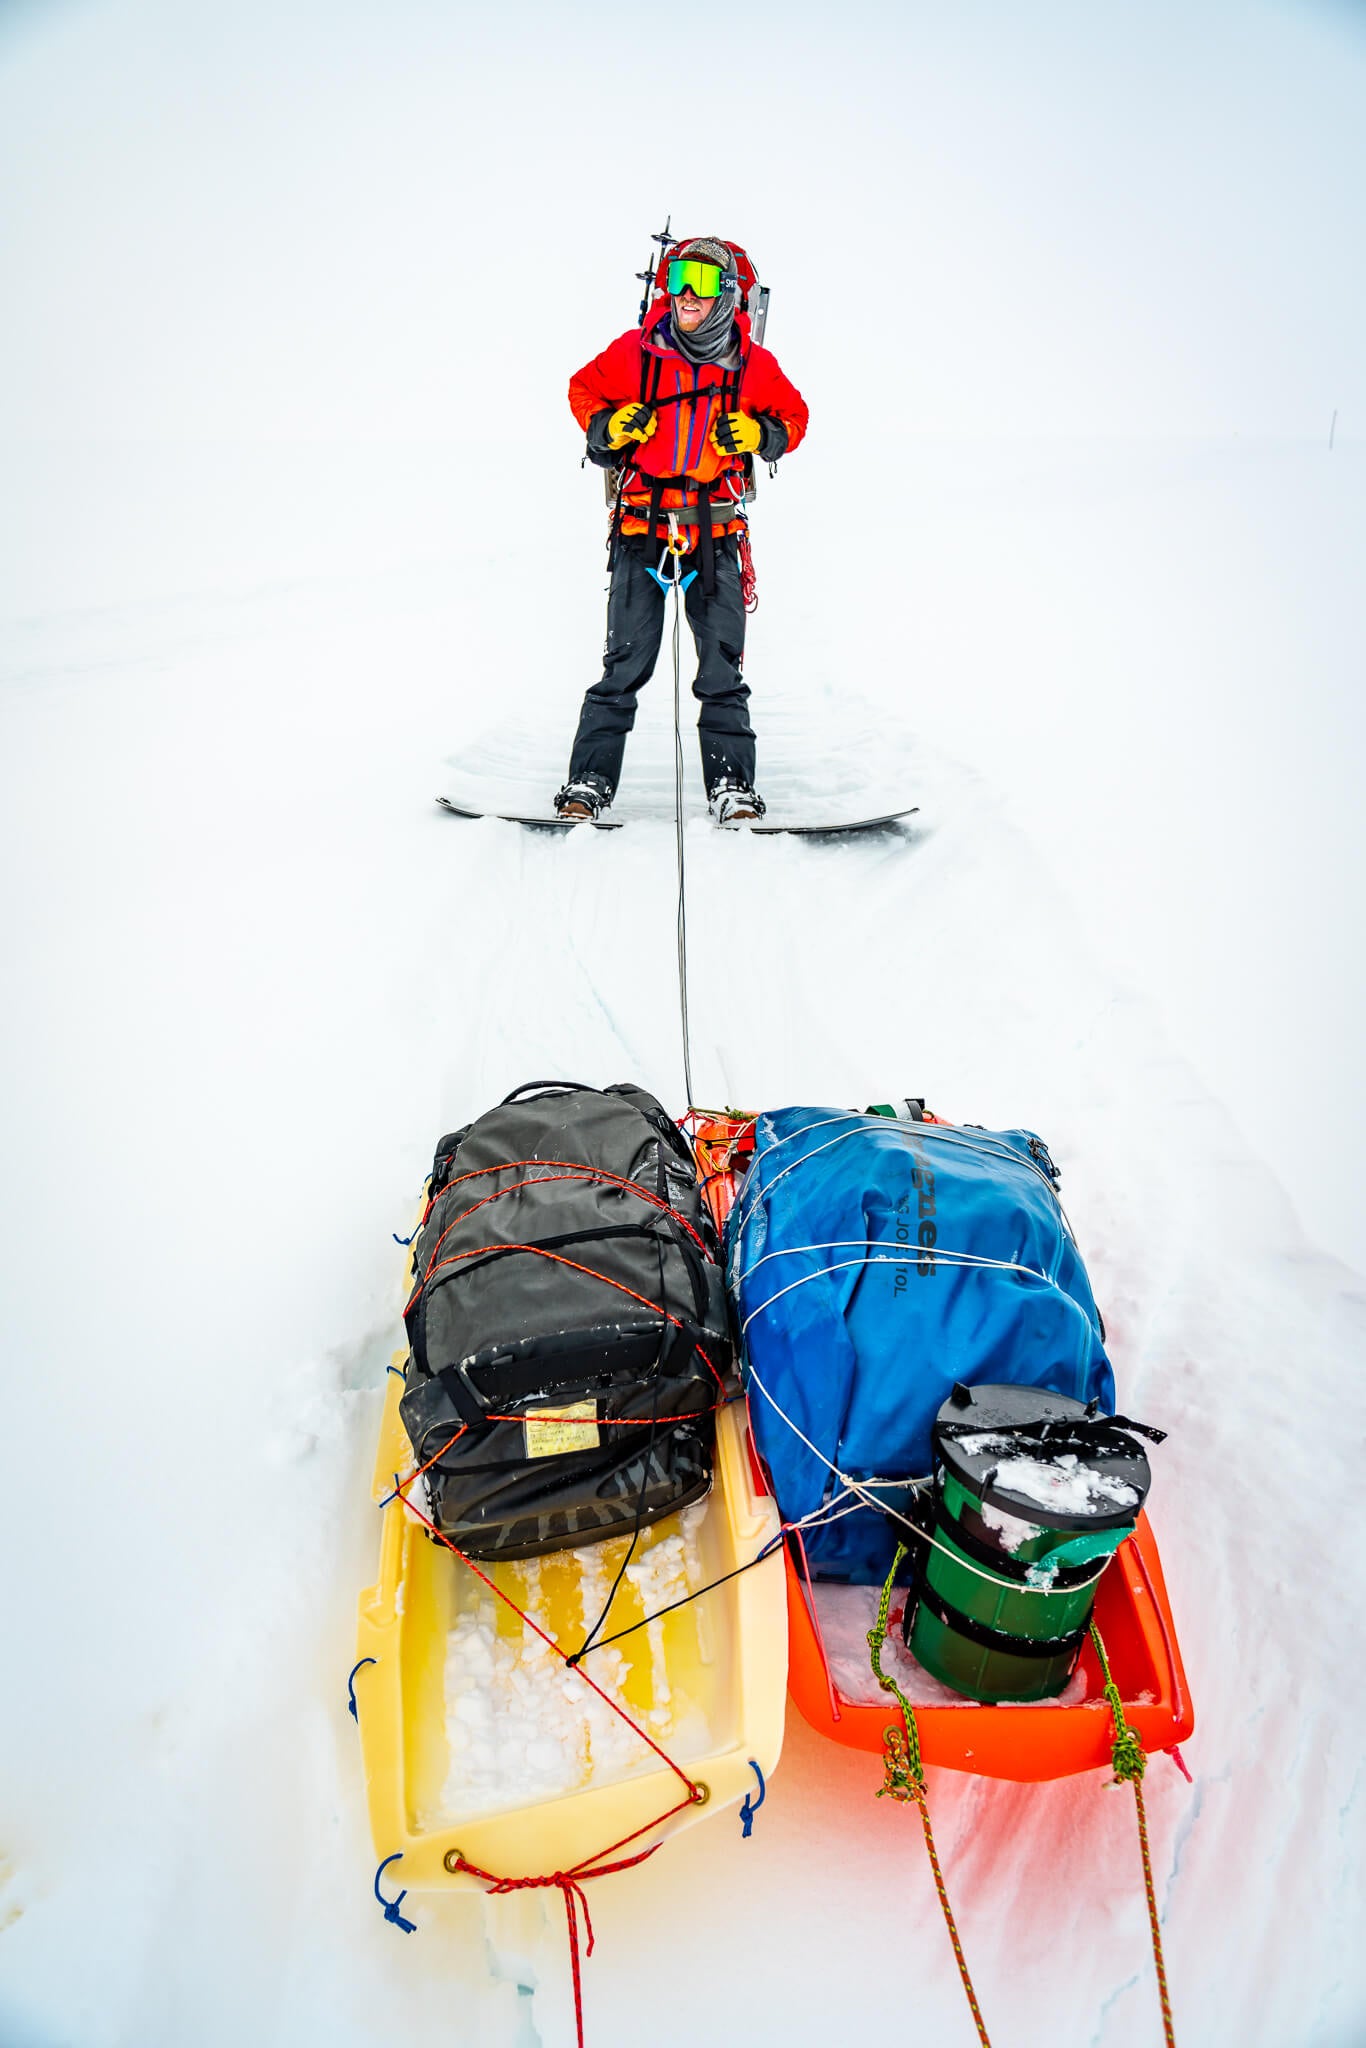 Joey Sackett wrangles 2 of our sleds on the descent from Denali